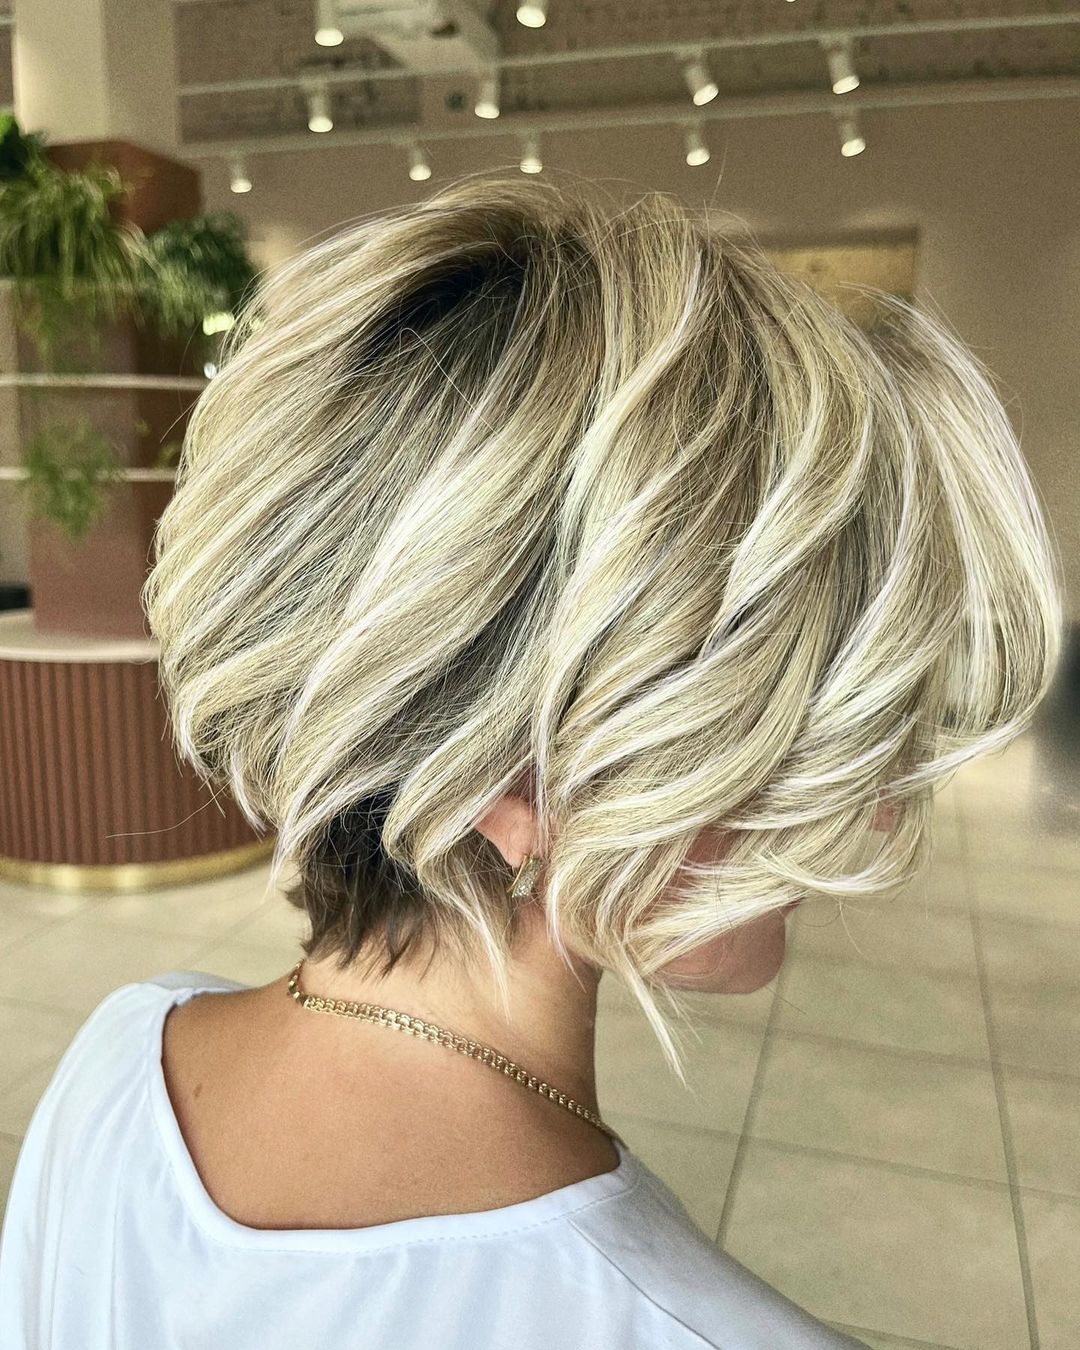 Short wavy bob: 16 magical, on-trend solutions